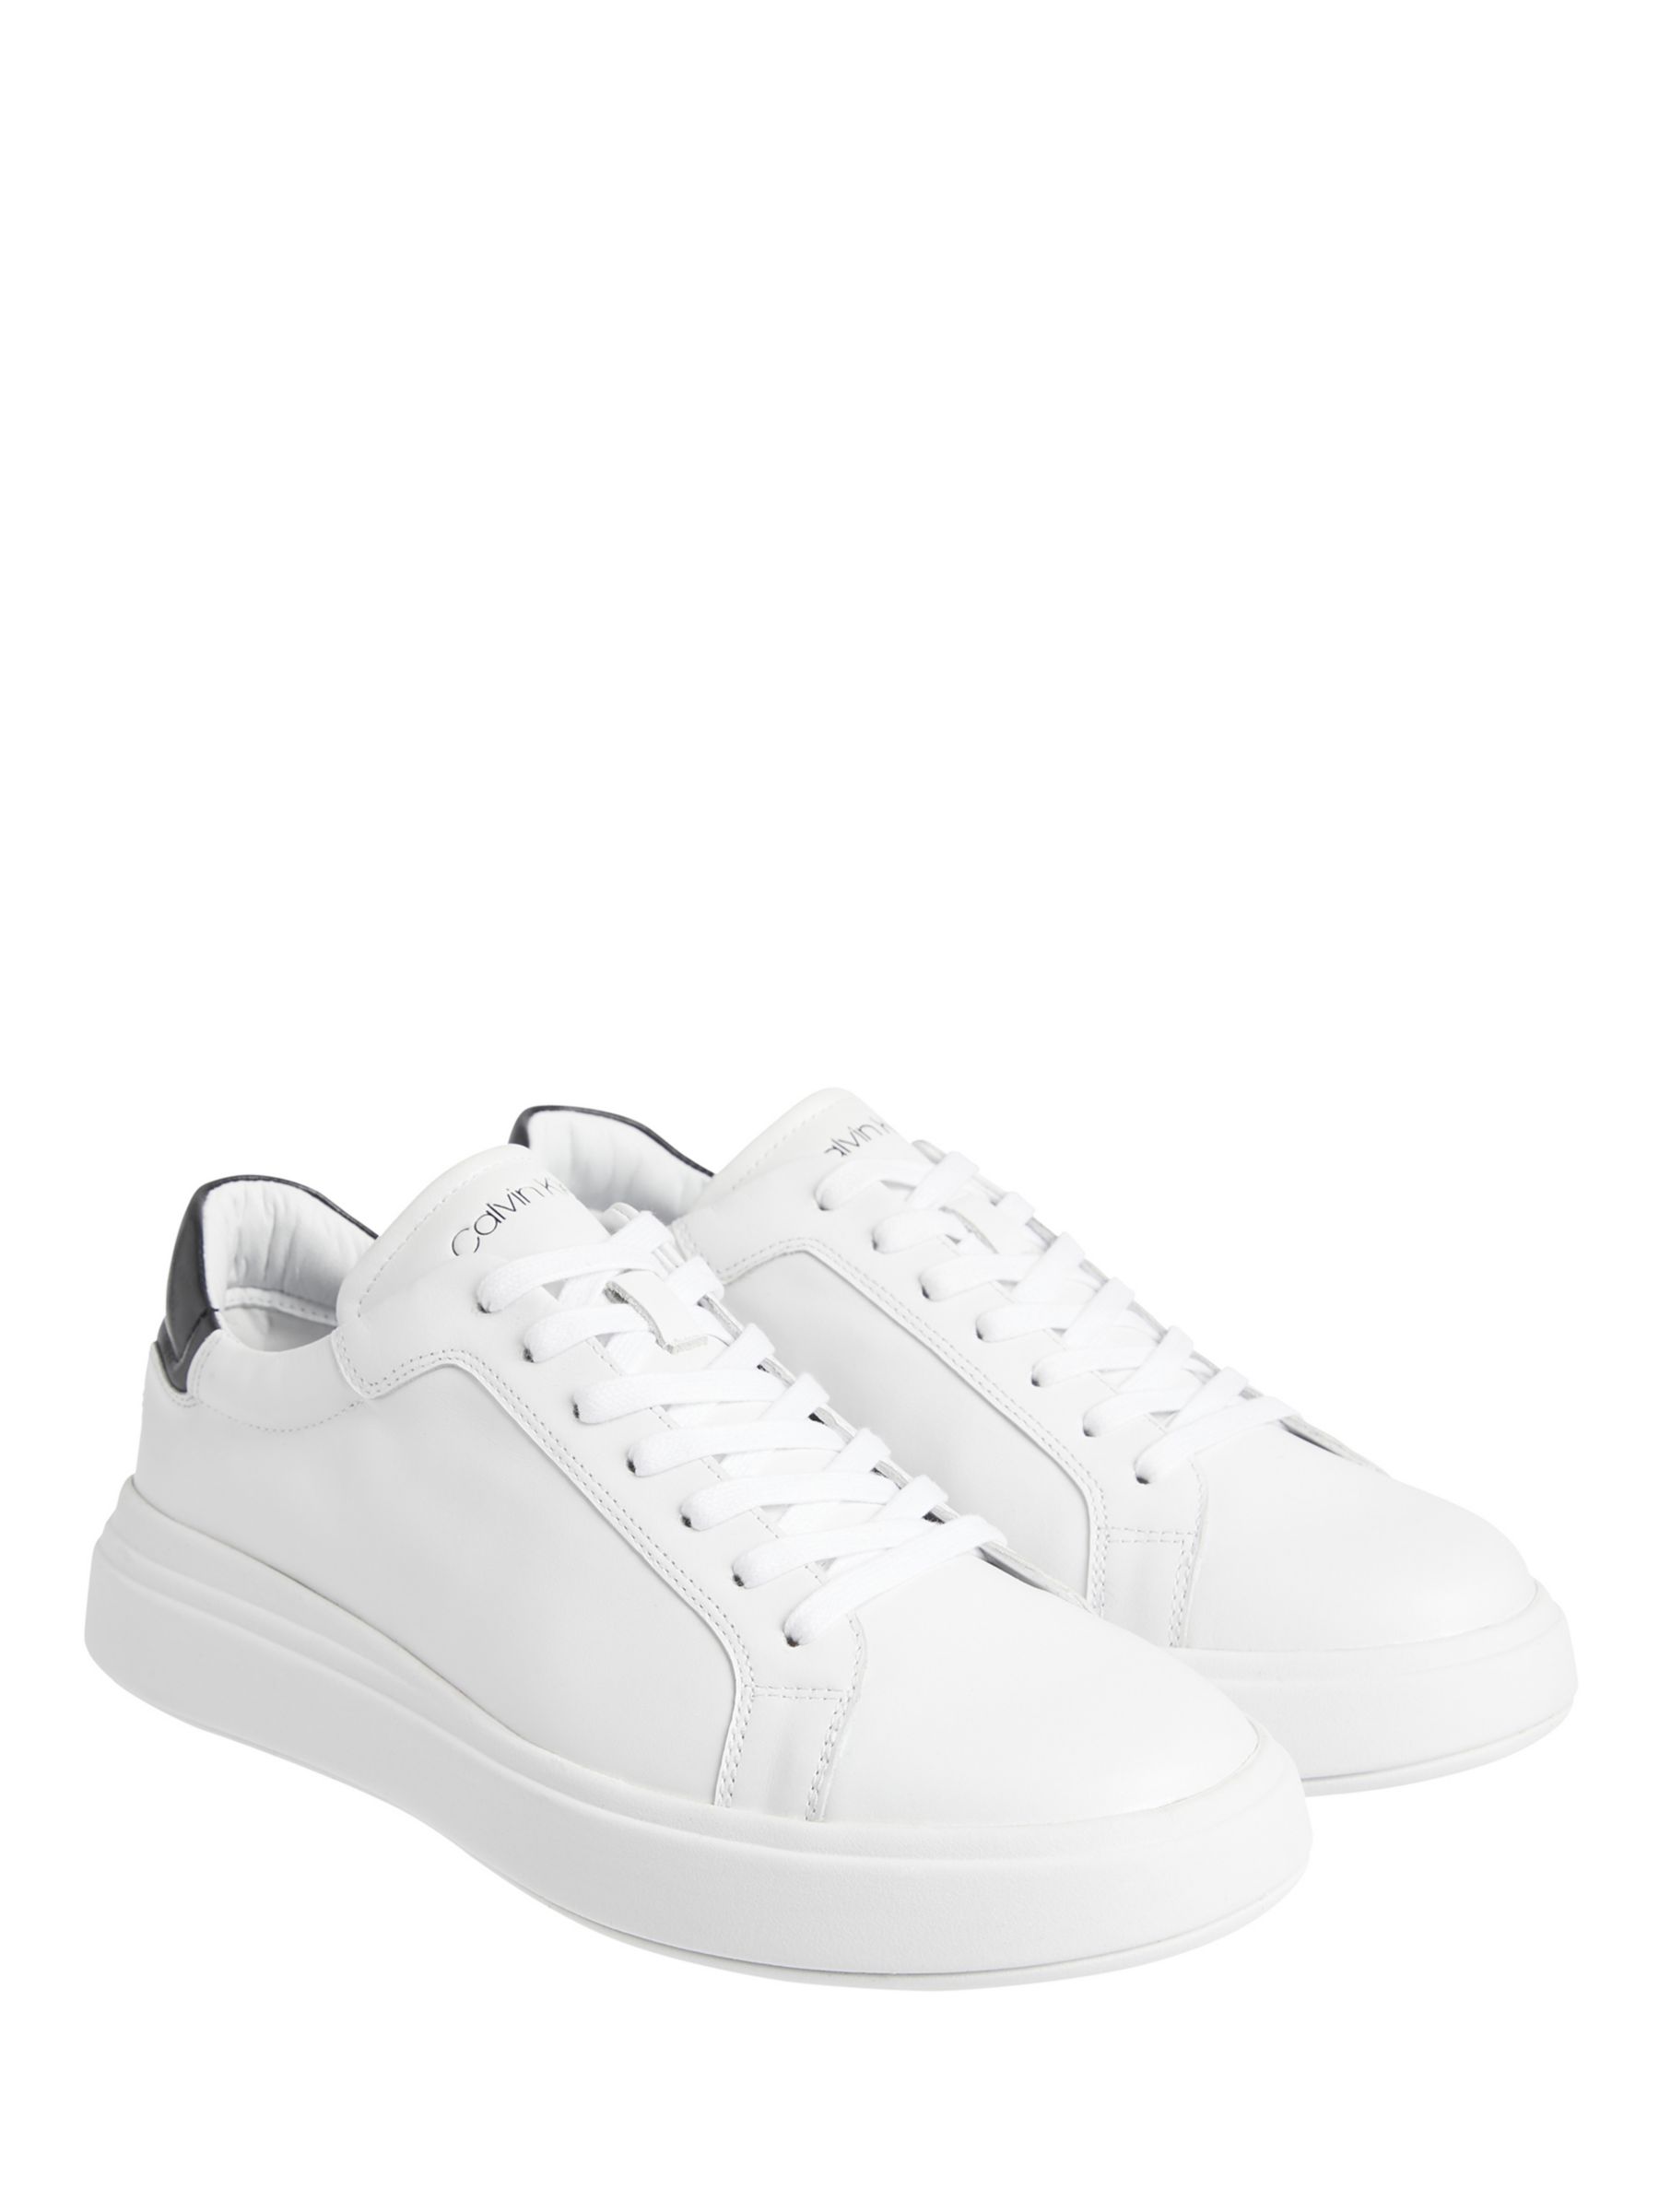 Calvin Klein Leather Low Top Lace Up Trainers, White/Black, 9